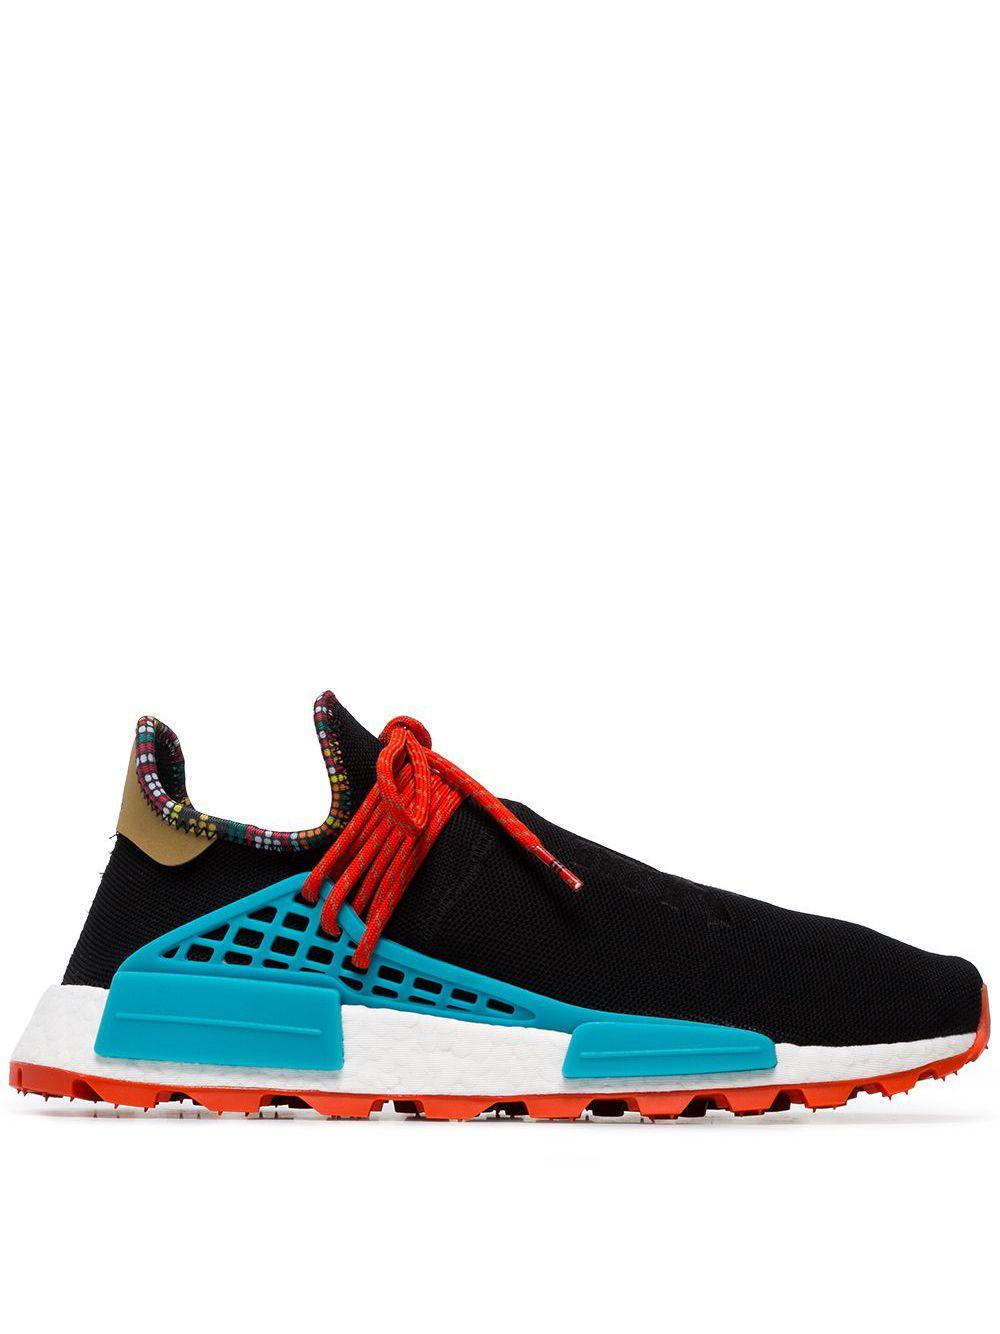 adidas Synthetic Pharrell Human Body Nmd Sneakers in Black for Men - Lyst